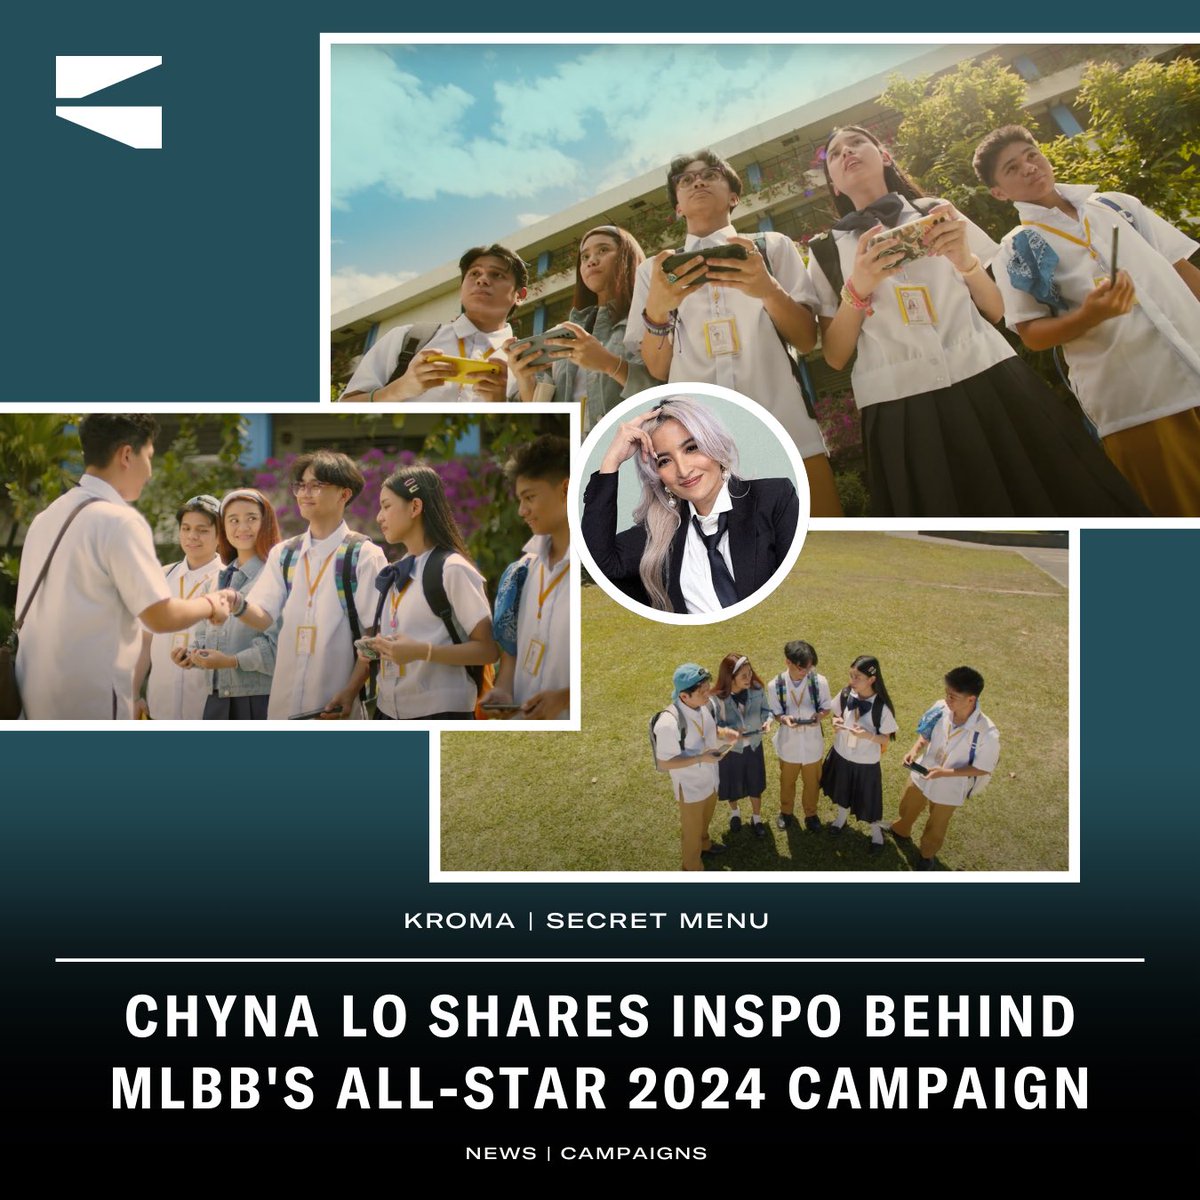 Director Chyna Lo explores the inspiration behind MLBB’s All-Star 2024 campaign in a new behind-the-scenes reel. This three-part series, crafted by Secret Menu, begins with 'Lodi,' an episode that draws parallels between life's challenges and gaming, emphasizing progress through